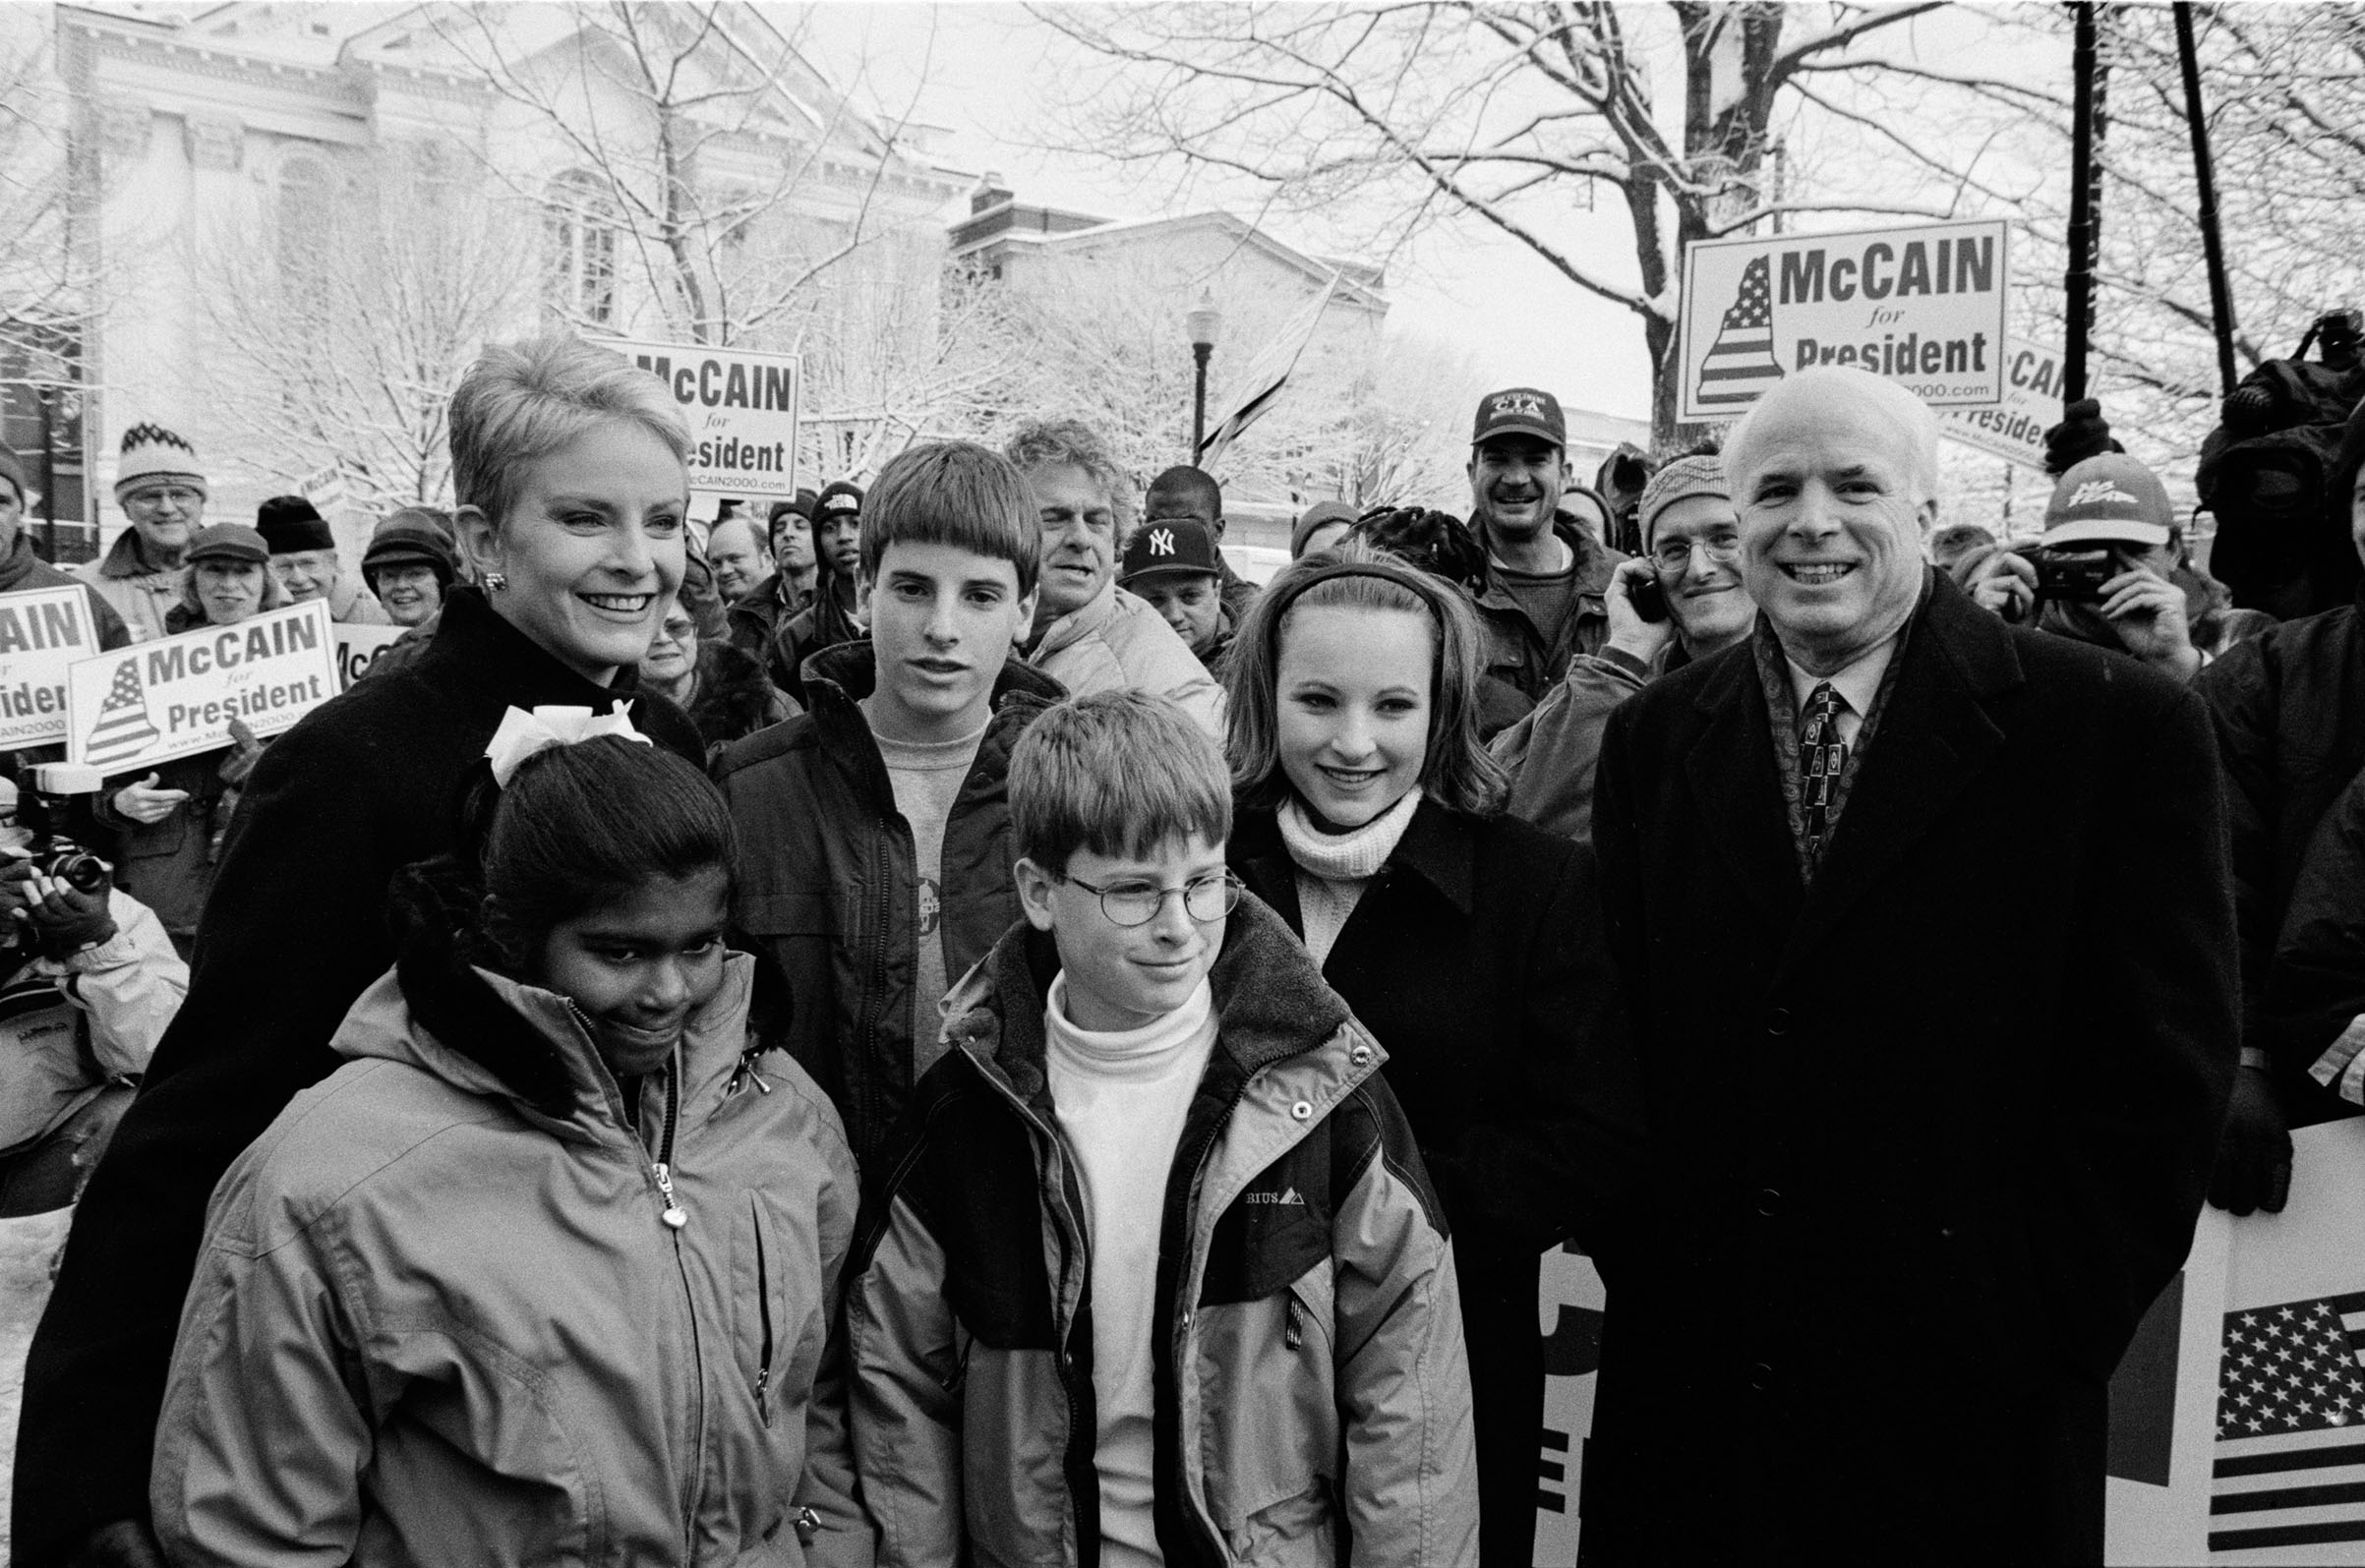 John McCain at a rally in the park with his family: (L-R) daughter Bridget (8), wife Cindy, sons Jack (13) and Jimmy (10), and daughter Meghan (15), in Keene, NH on Jan. 31, 2000. (David Hume Kennerly—Getty Images)